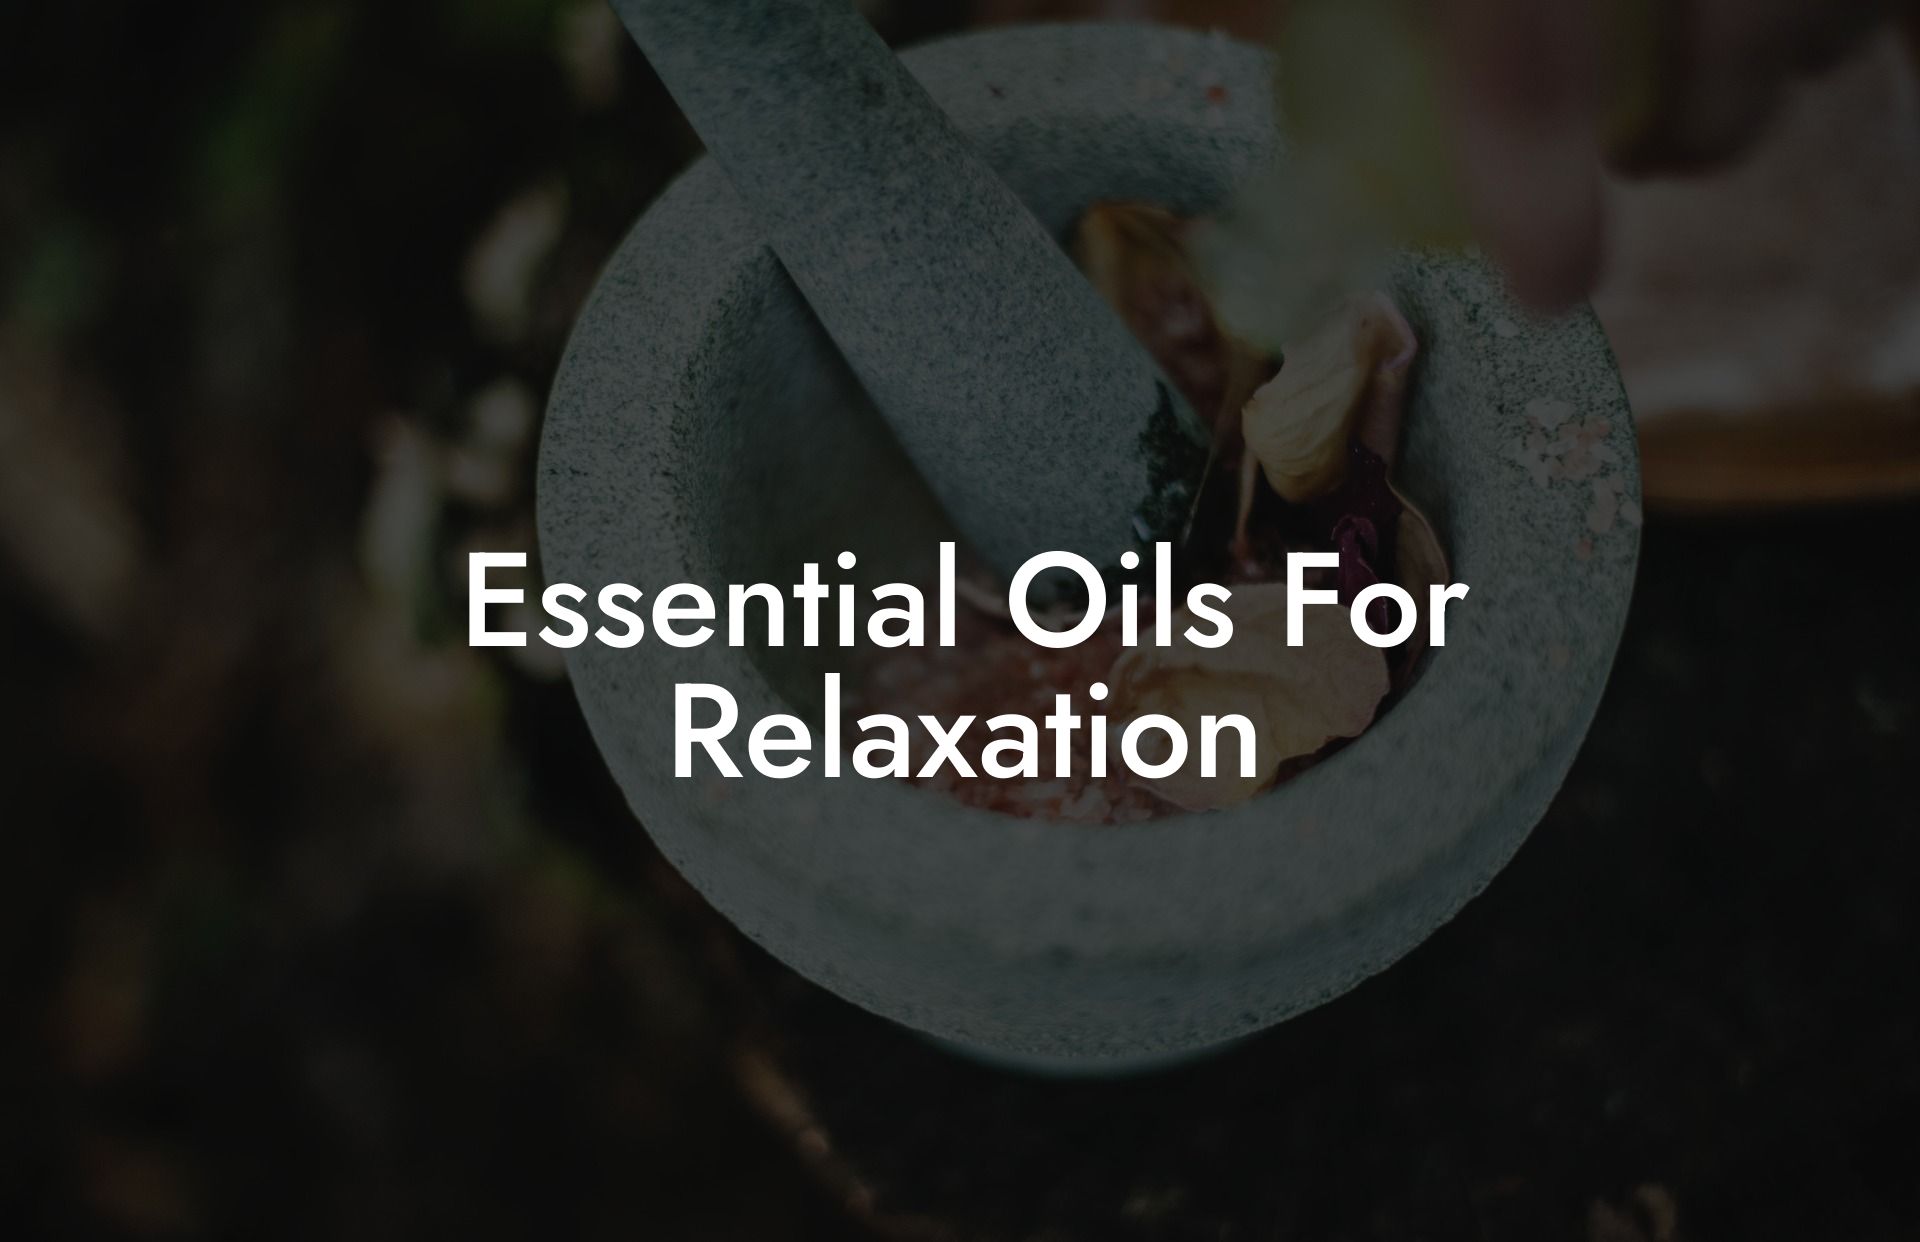 Essential Oils For Relaxation